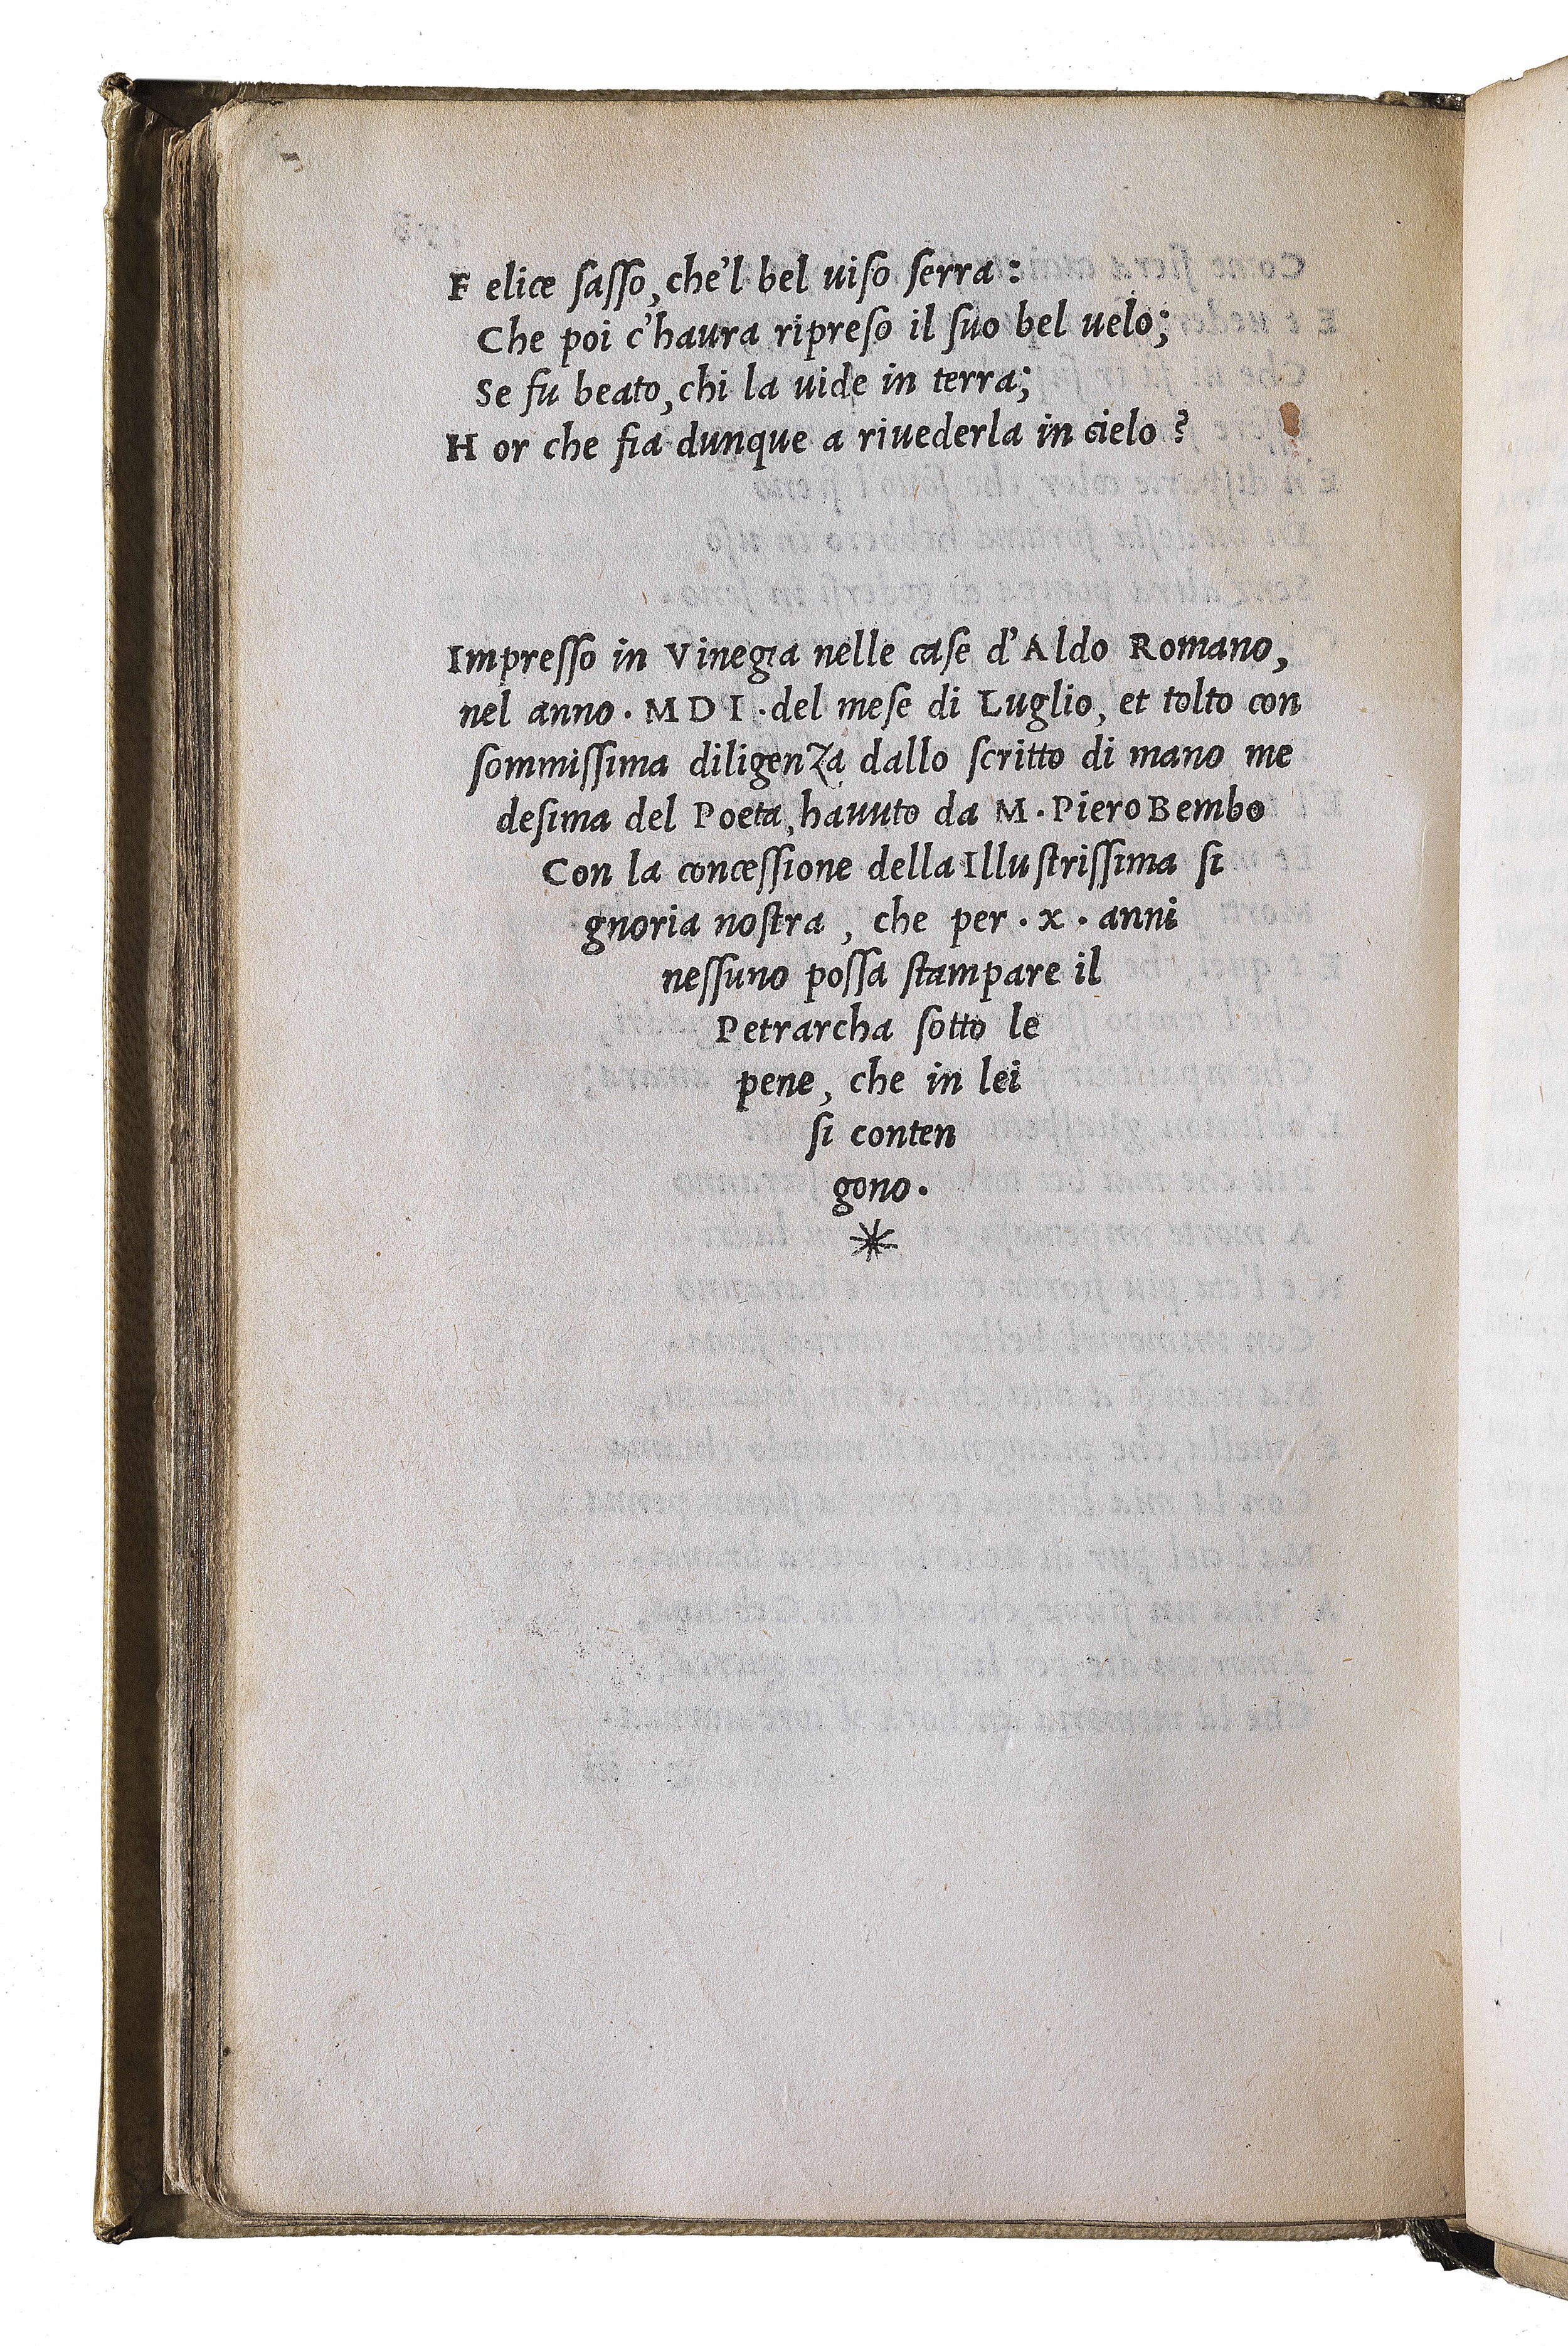 Collection How Petrarca became famous (till 1450) - Page 2